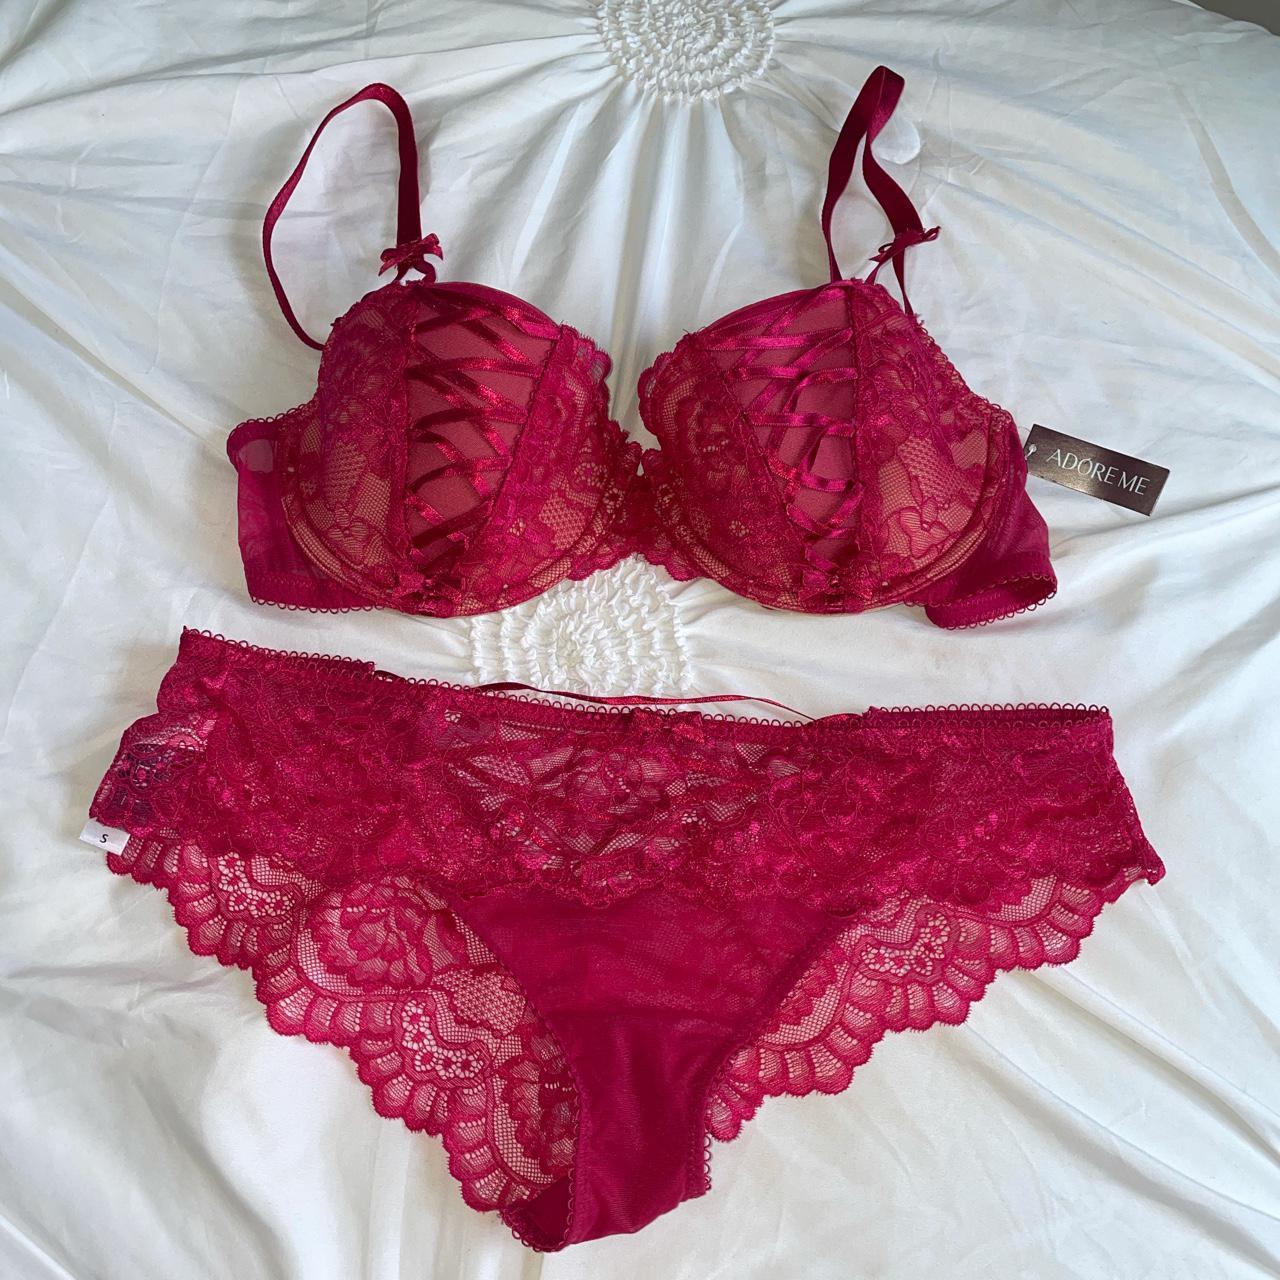 Adore me bra and underwear set - or sold as